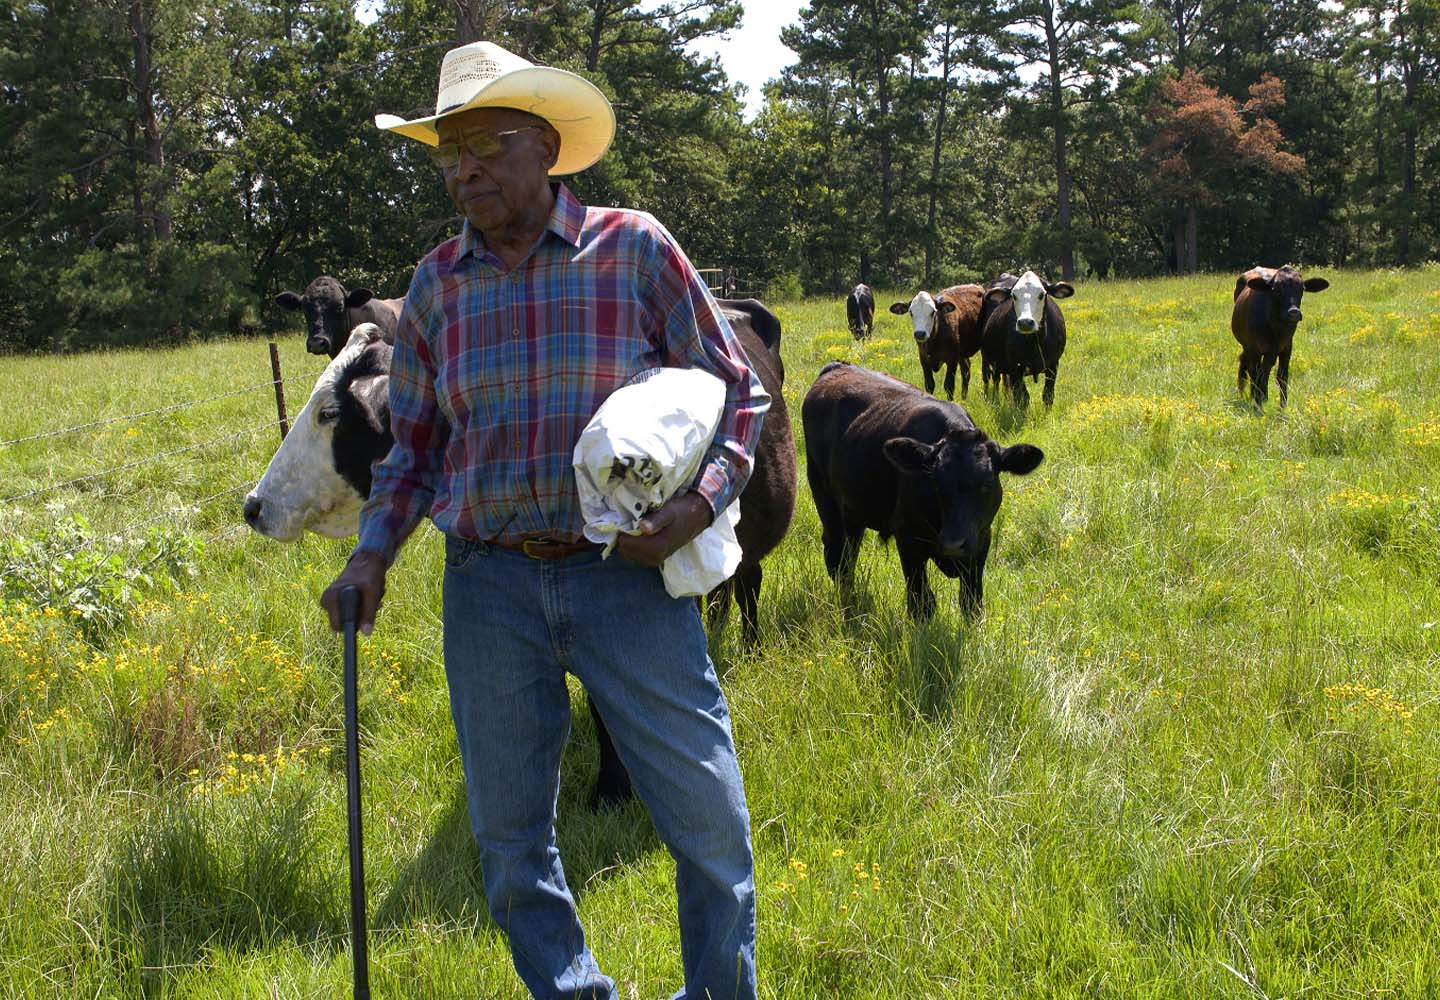 Winford Bowie with a walking stick and his cattle trailing behind him in the grass. July 2019